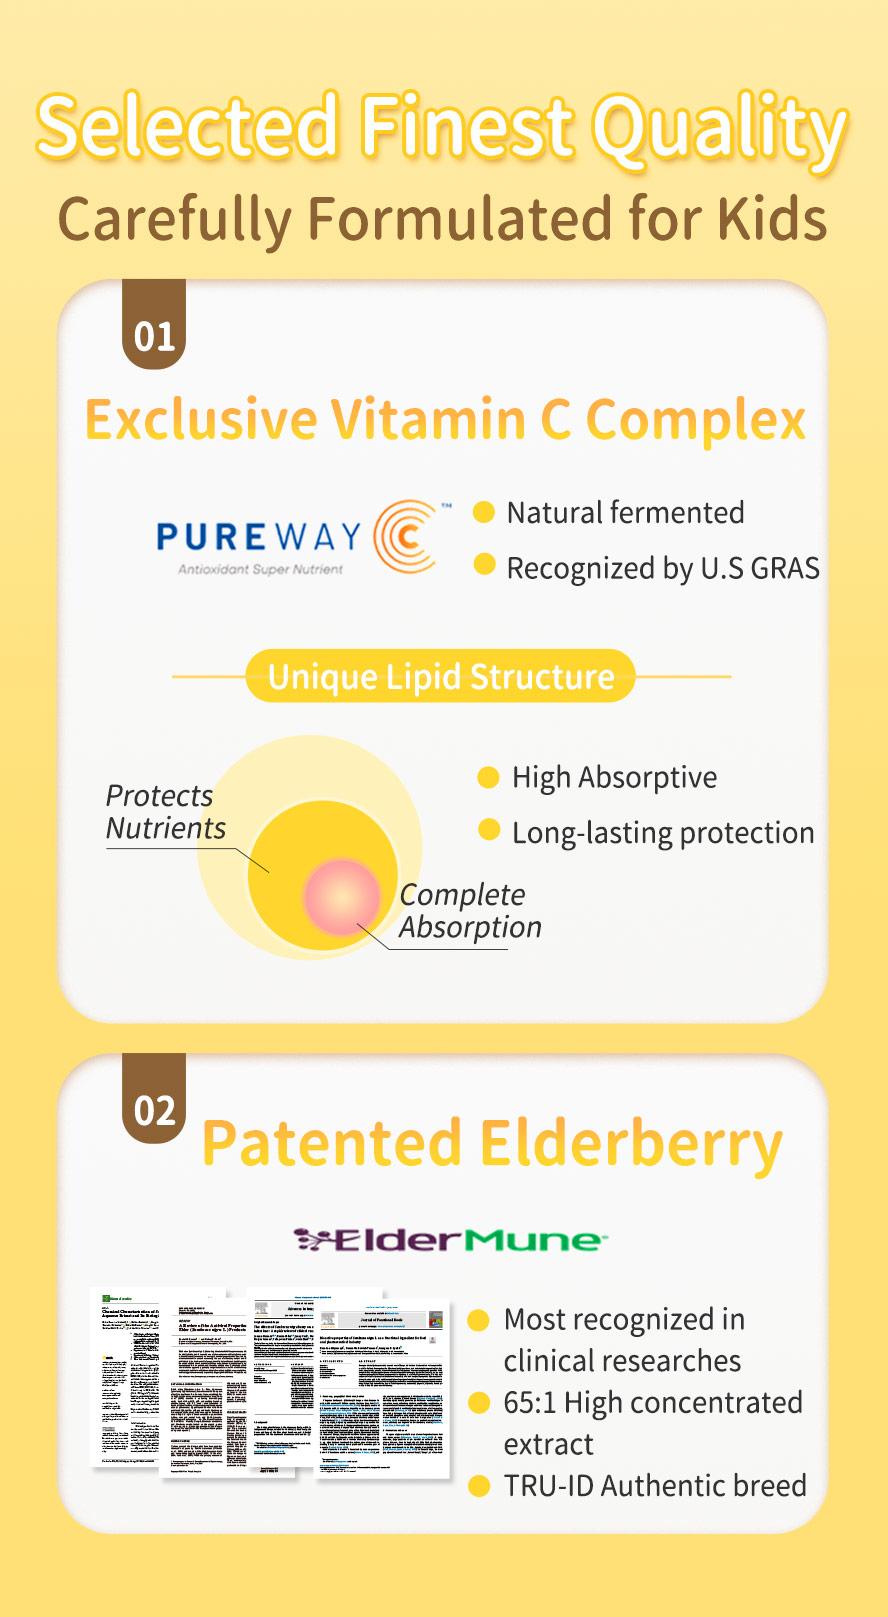 Exclusive PUREWAY Vitamin C complex with high absorptive & longer lasting protection & high concentrated patented elderberry with clinical researches proven effectiveness